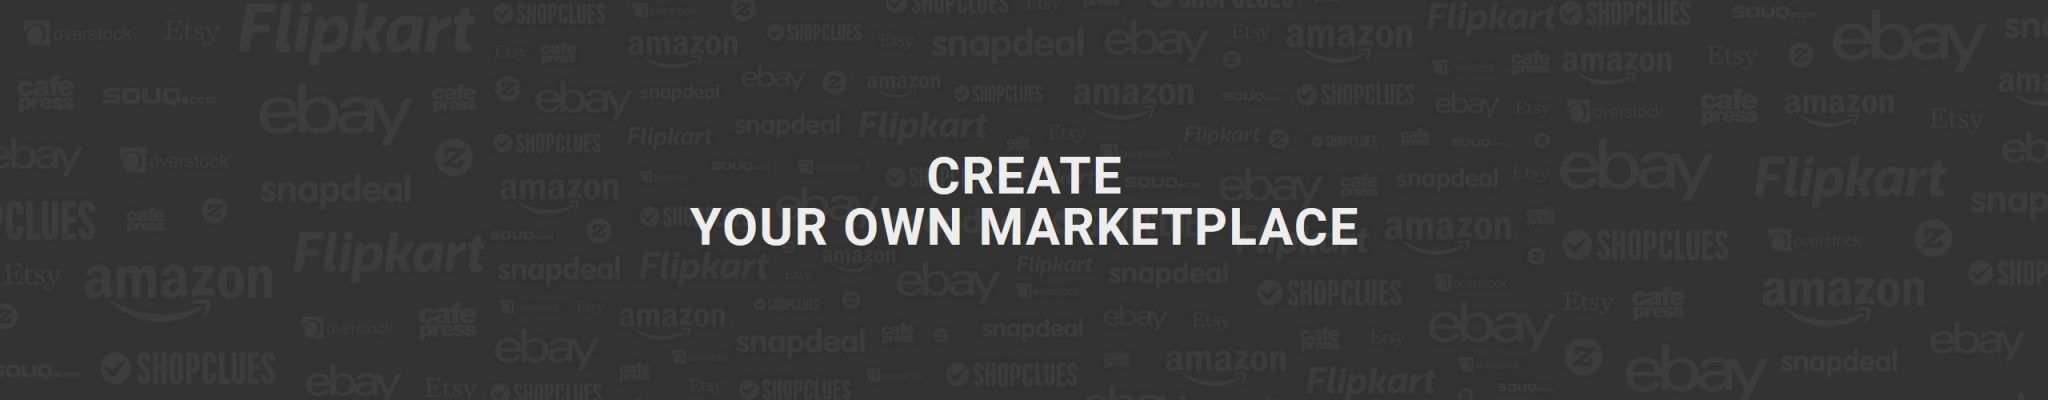 Build Your Own Marketplace Modeled eCommerce Store In The Easiest Way